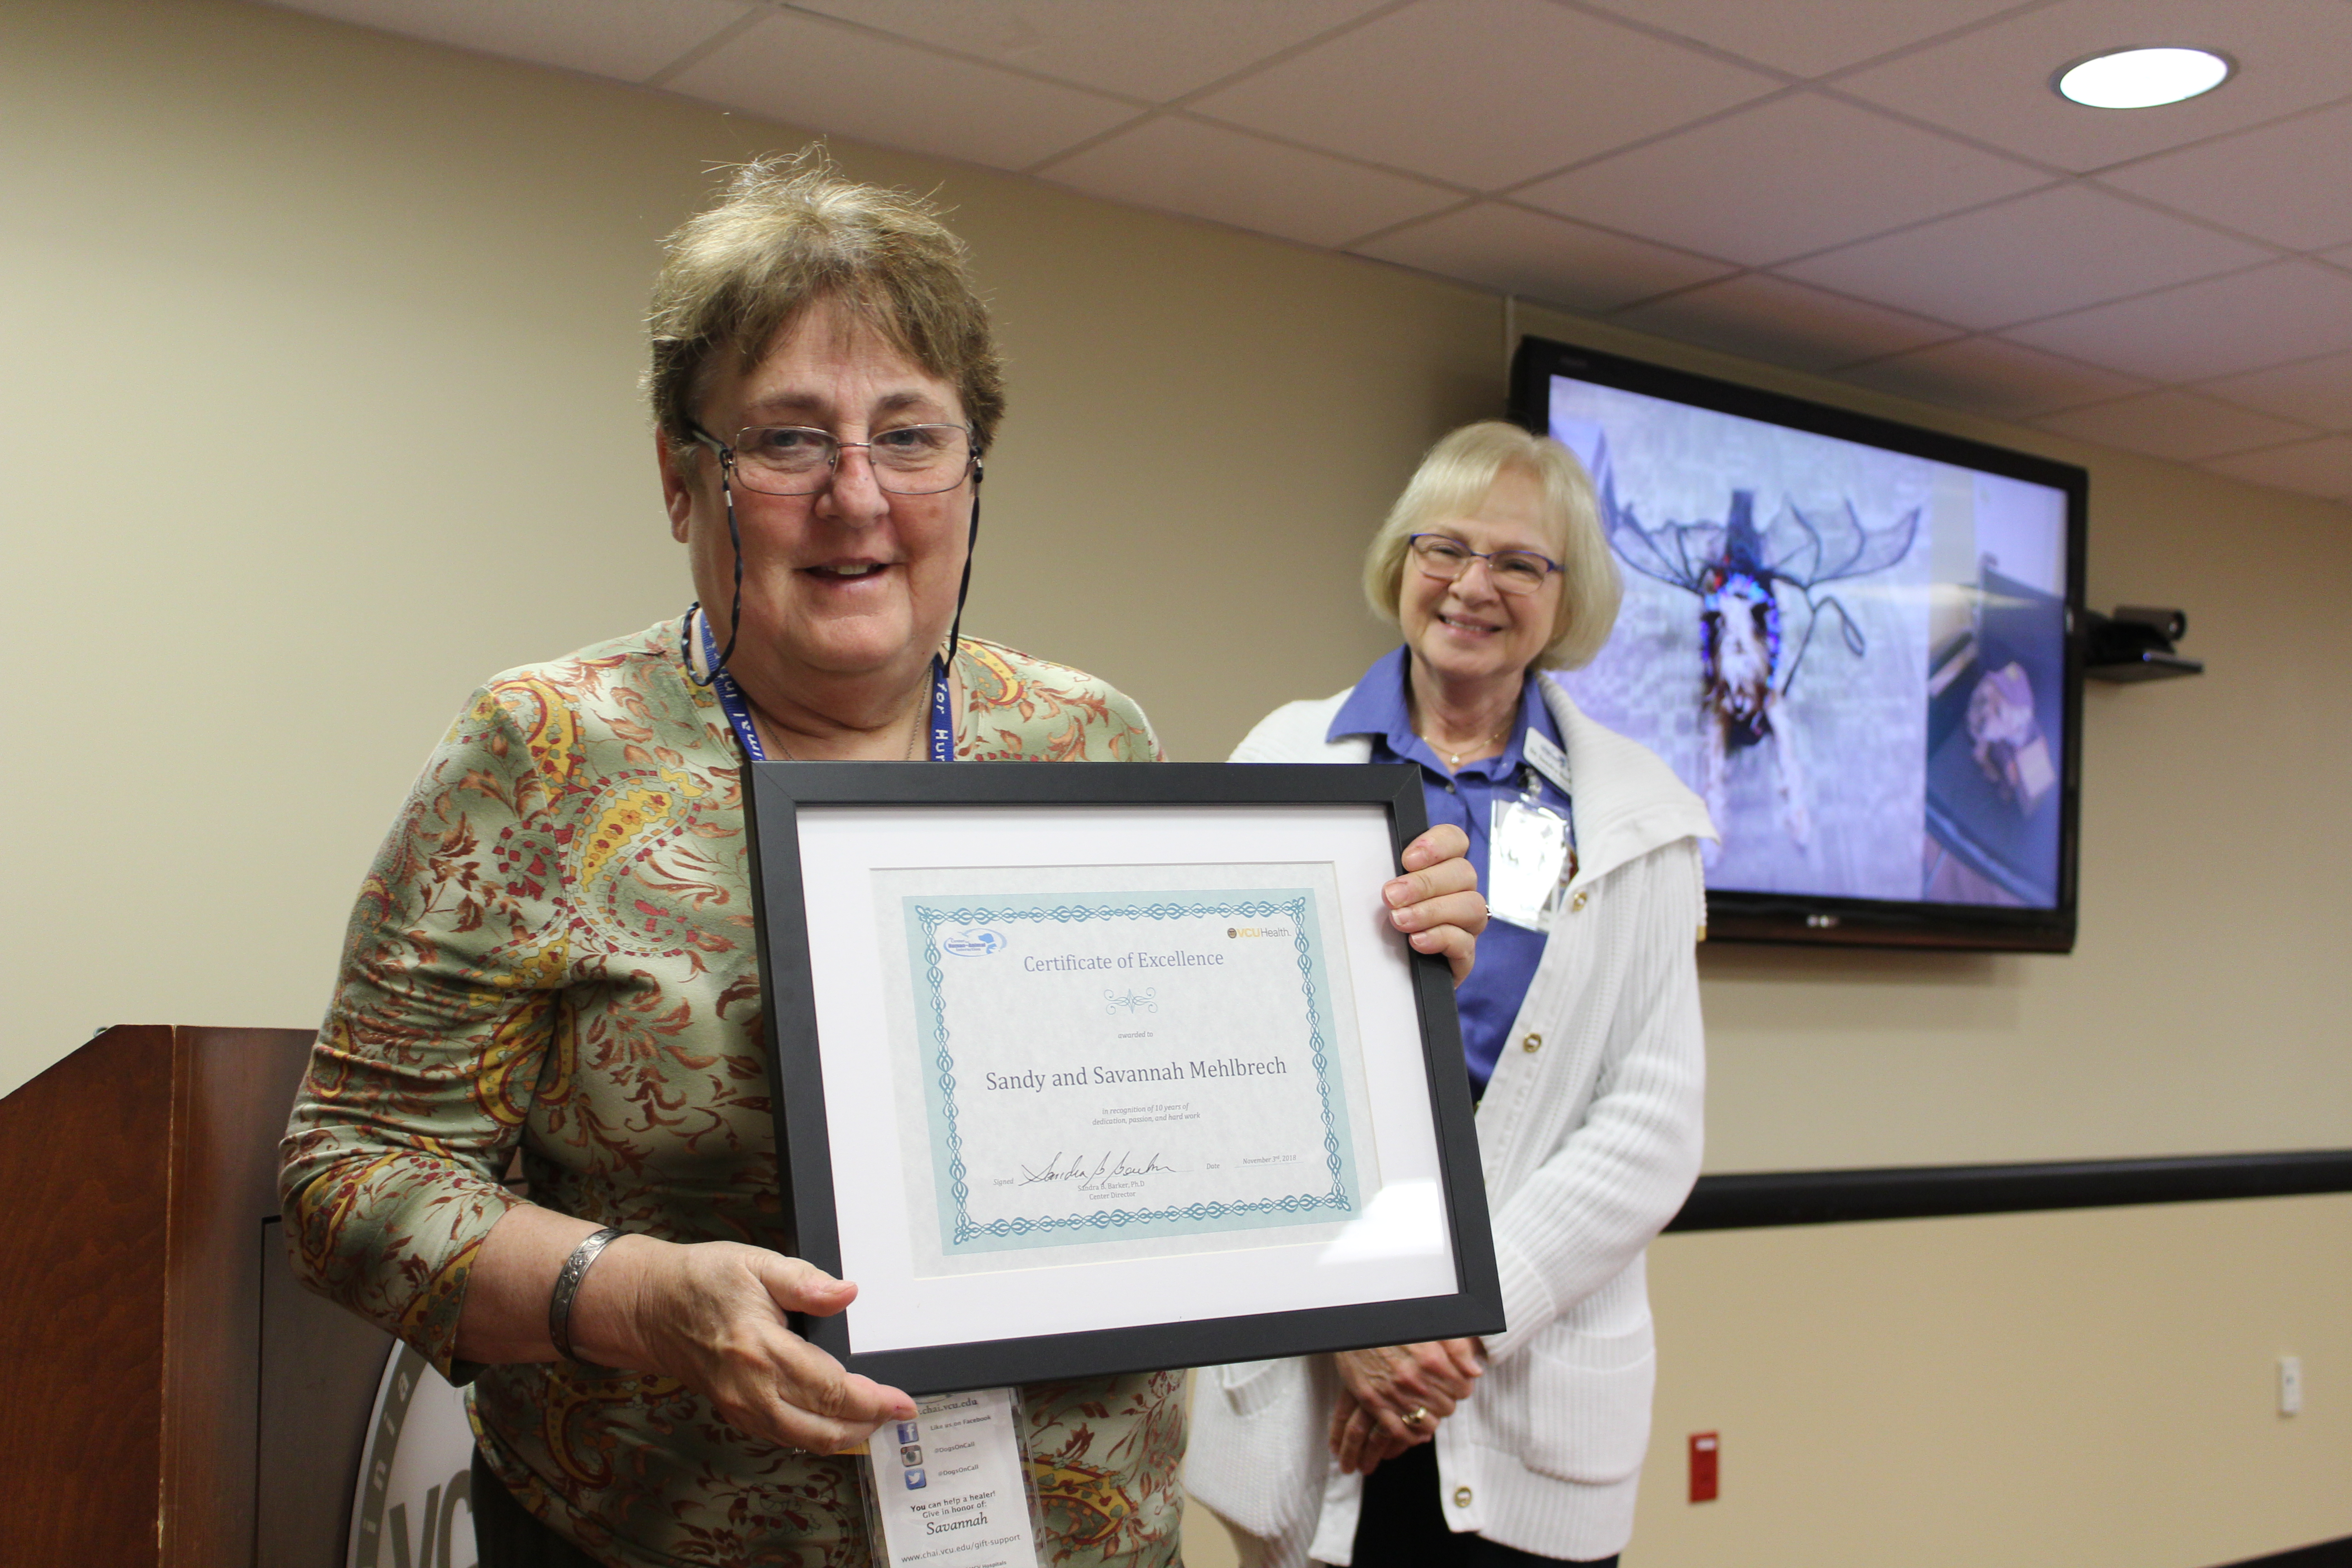 A Dogs On Call therapy dog handler receives a framed certificate recognizing 10 years of volunteering. Dr. Barker stands behind the smiling volunteer.